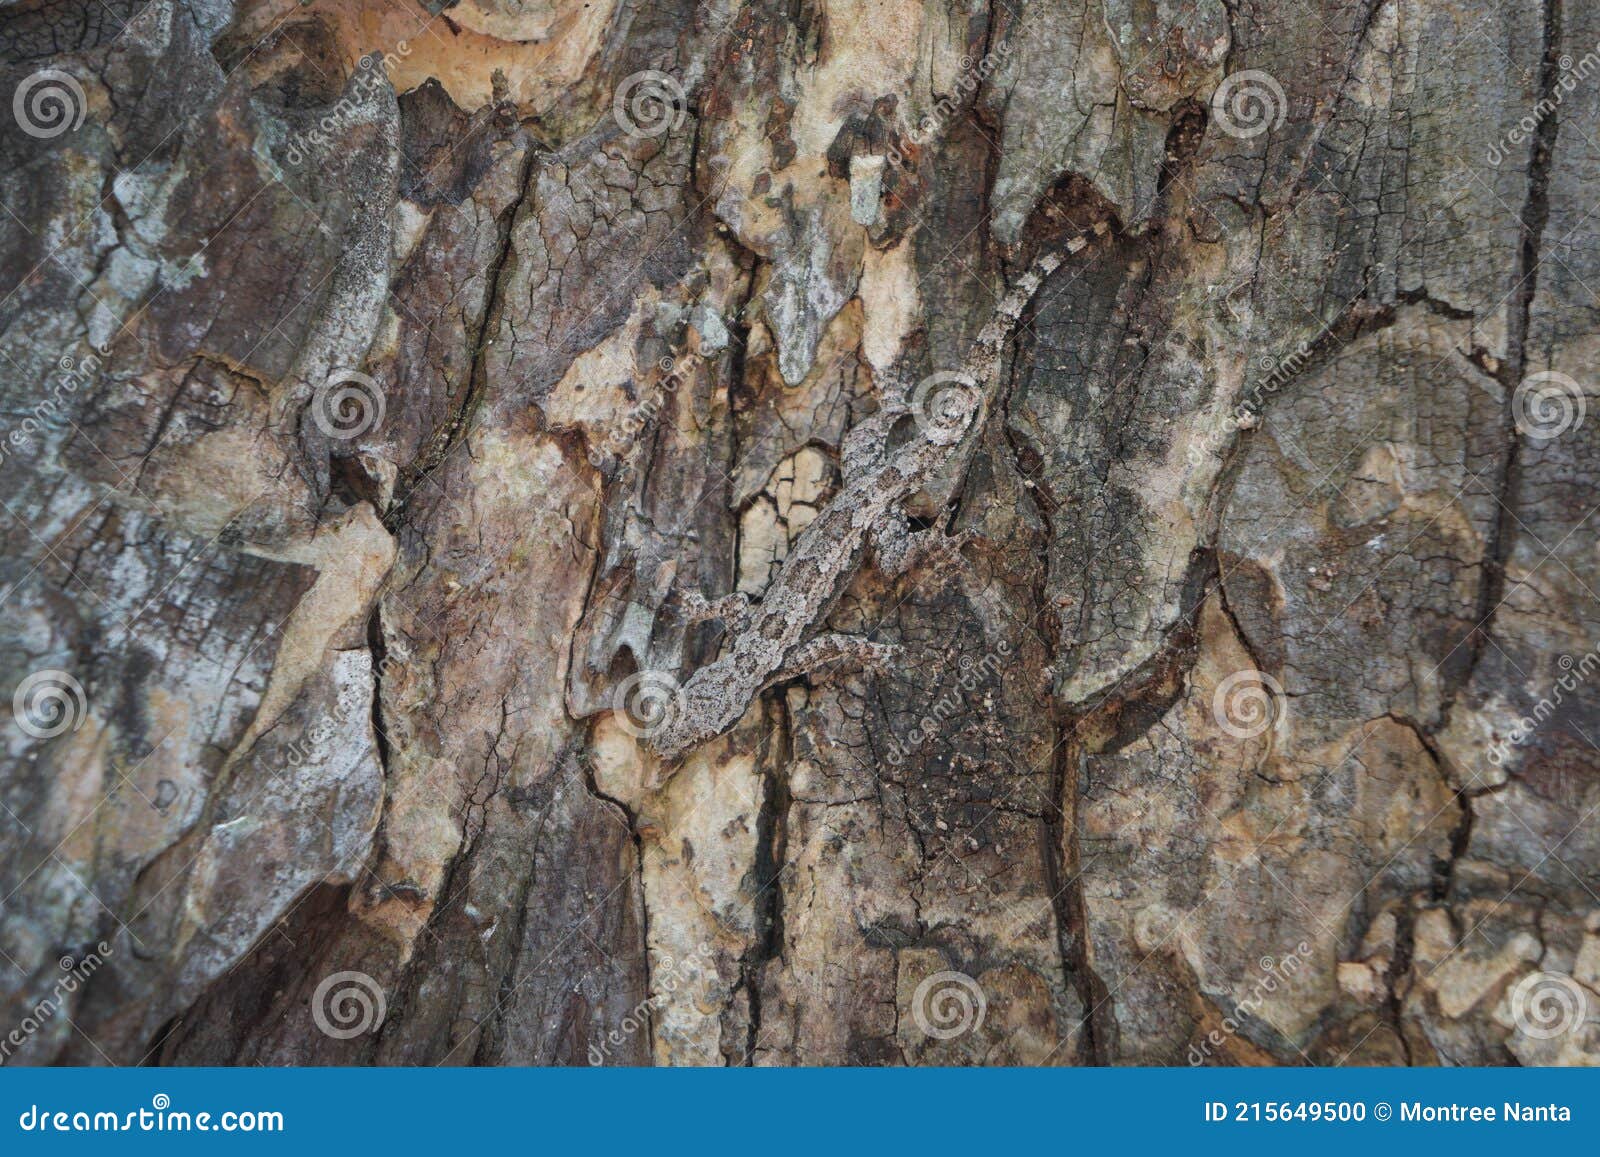 The Lizard is Camouflaged in the Bark. Crypsis or Camouflage of Lizard.  Stock Photo - Image of surface, textured: 215649500